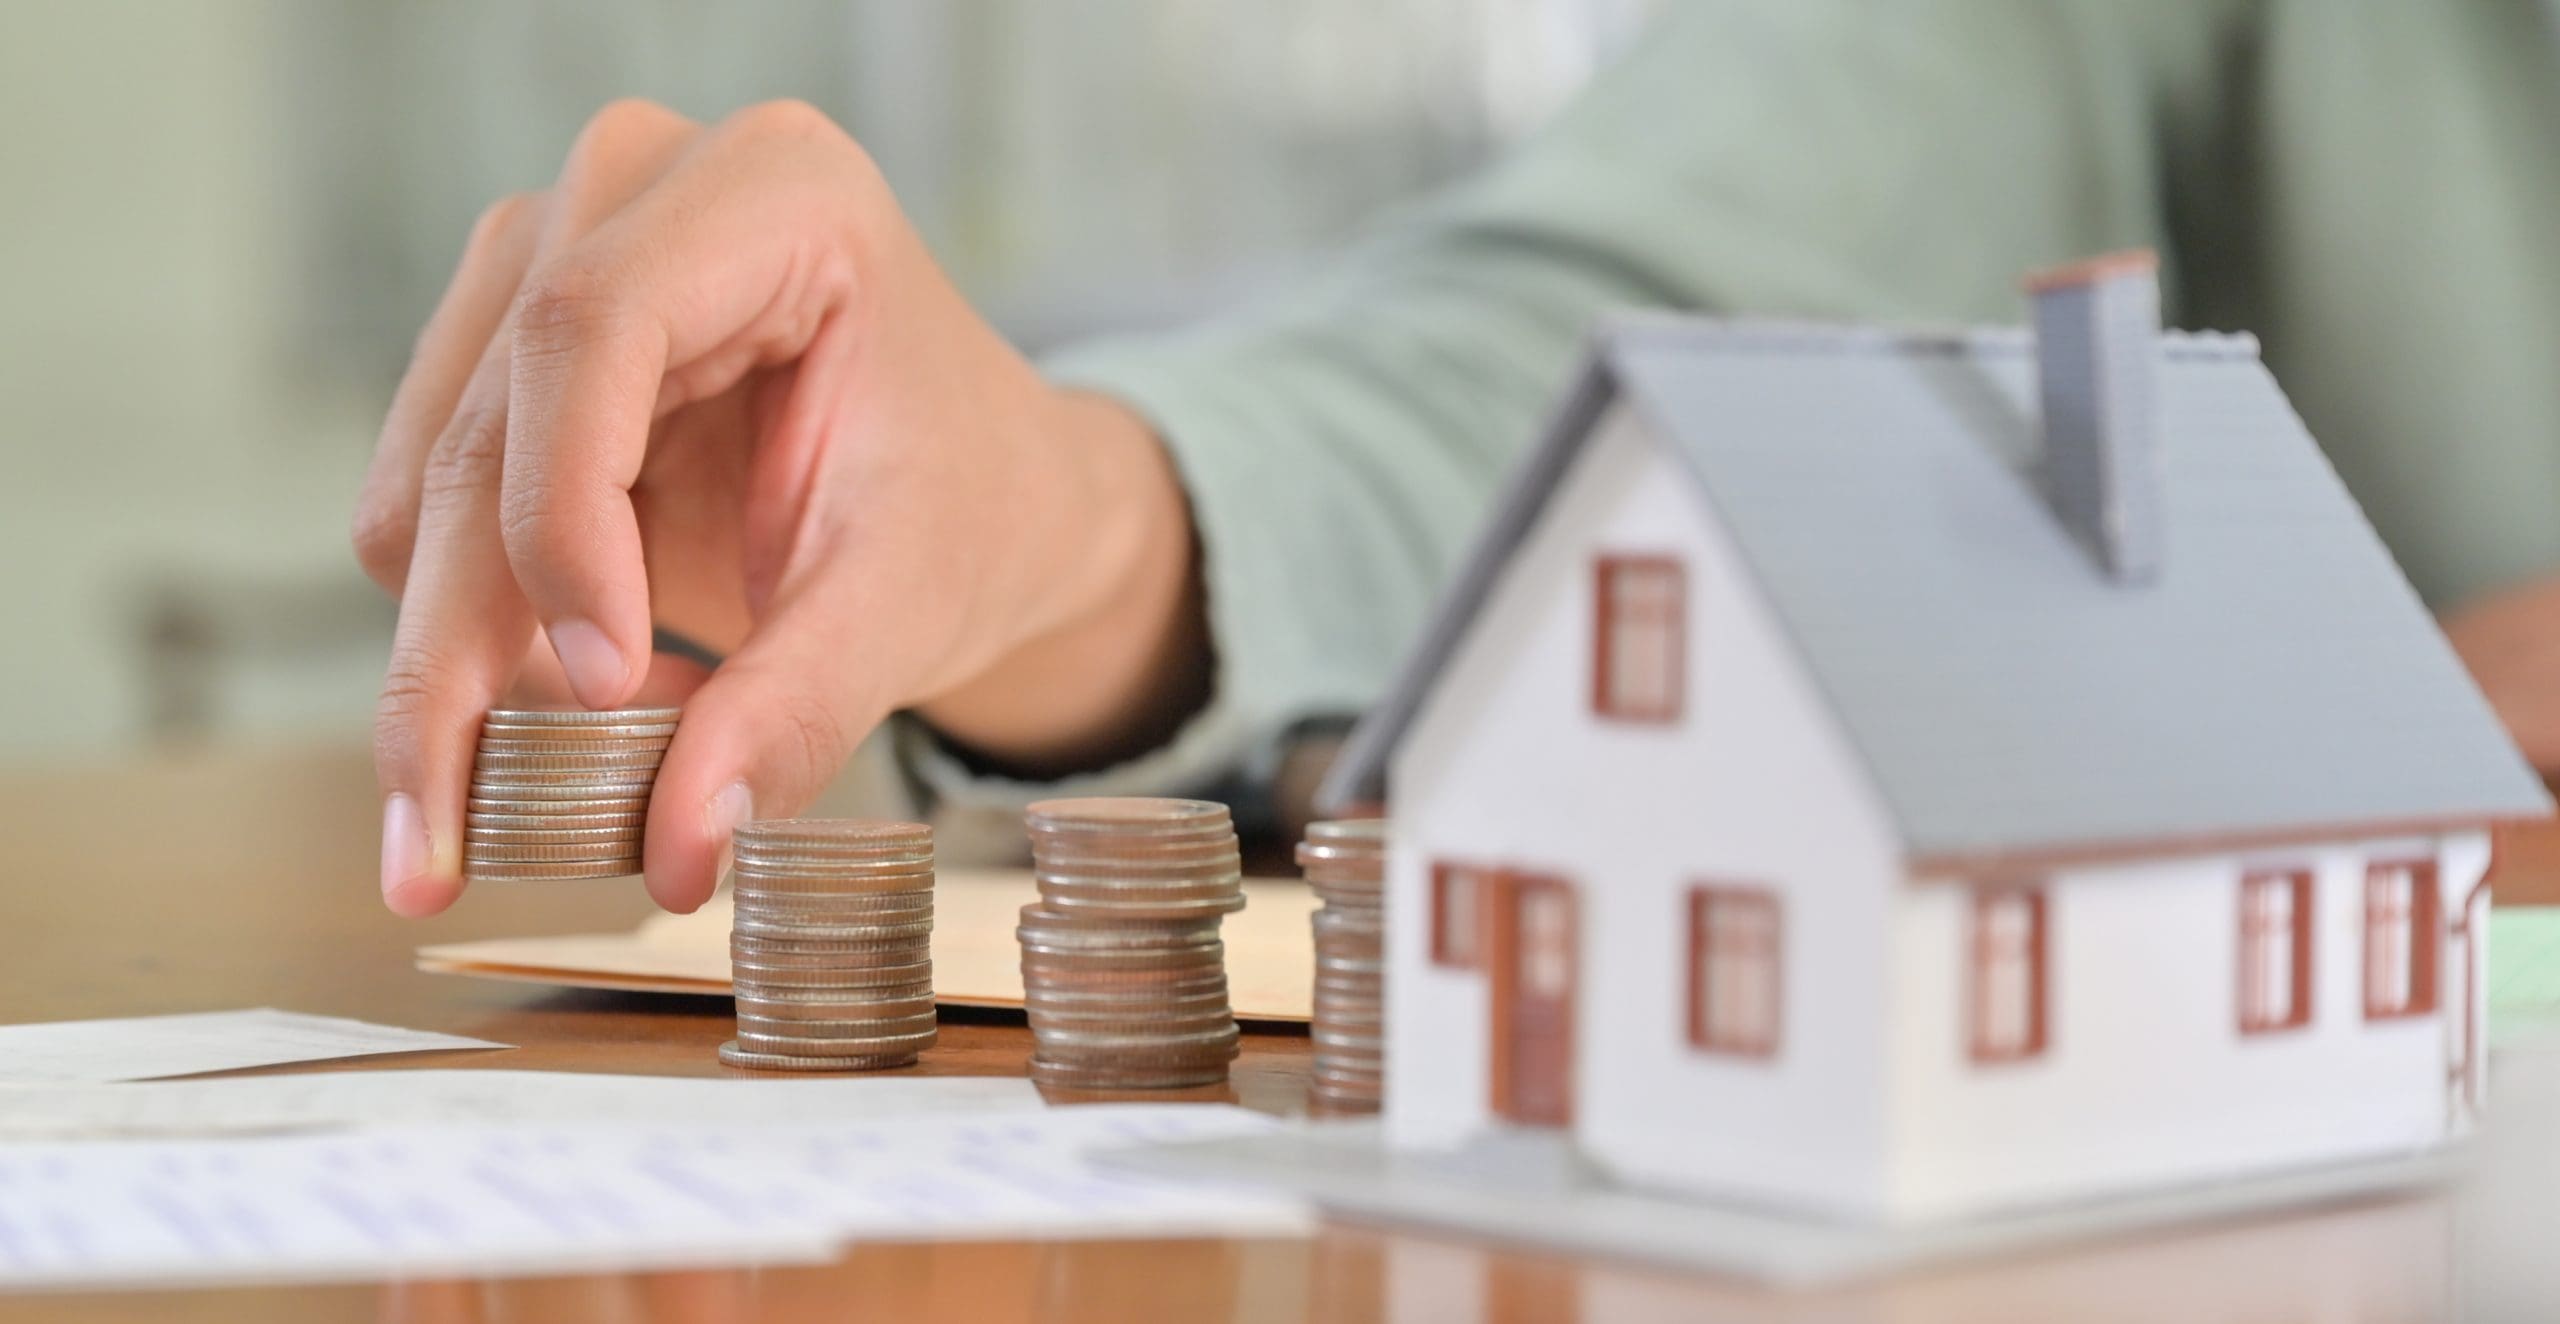 How to Determine the Real Cost of a House